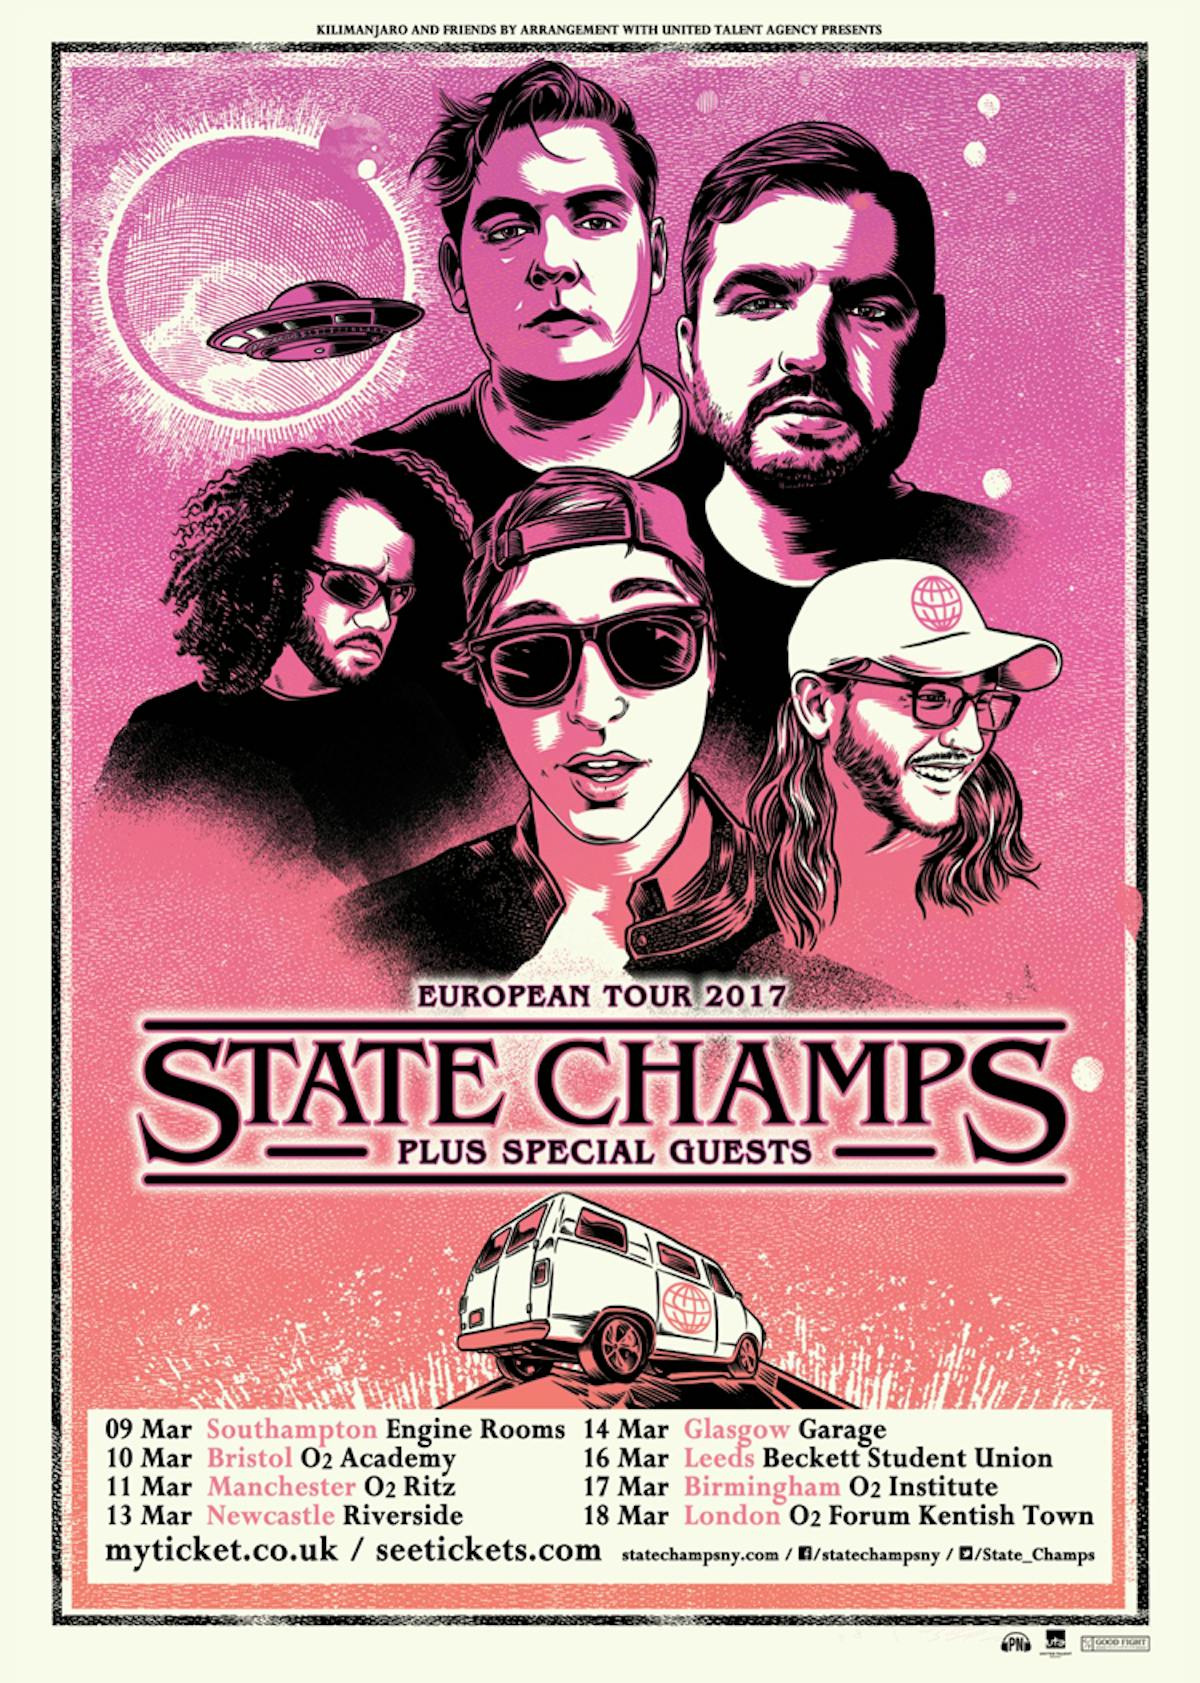 There’s A New State Champs Video — Kerrang!